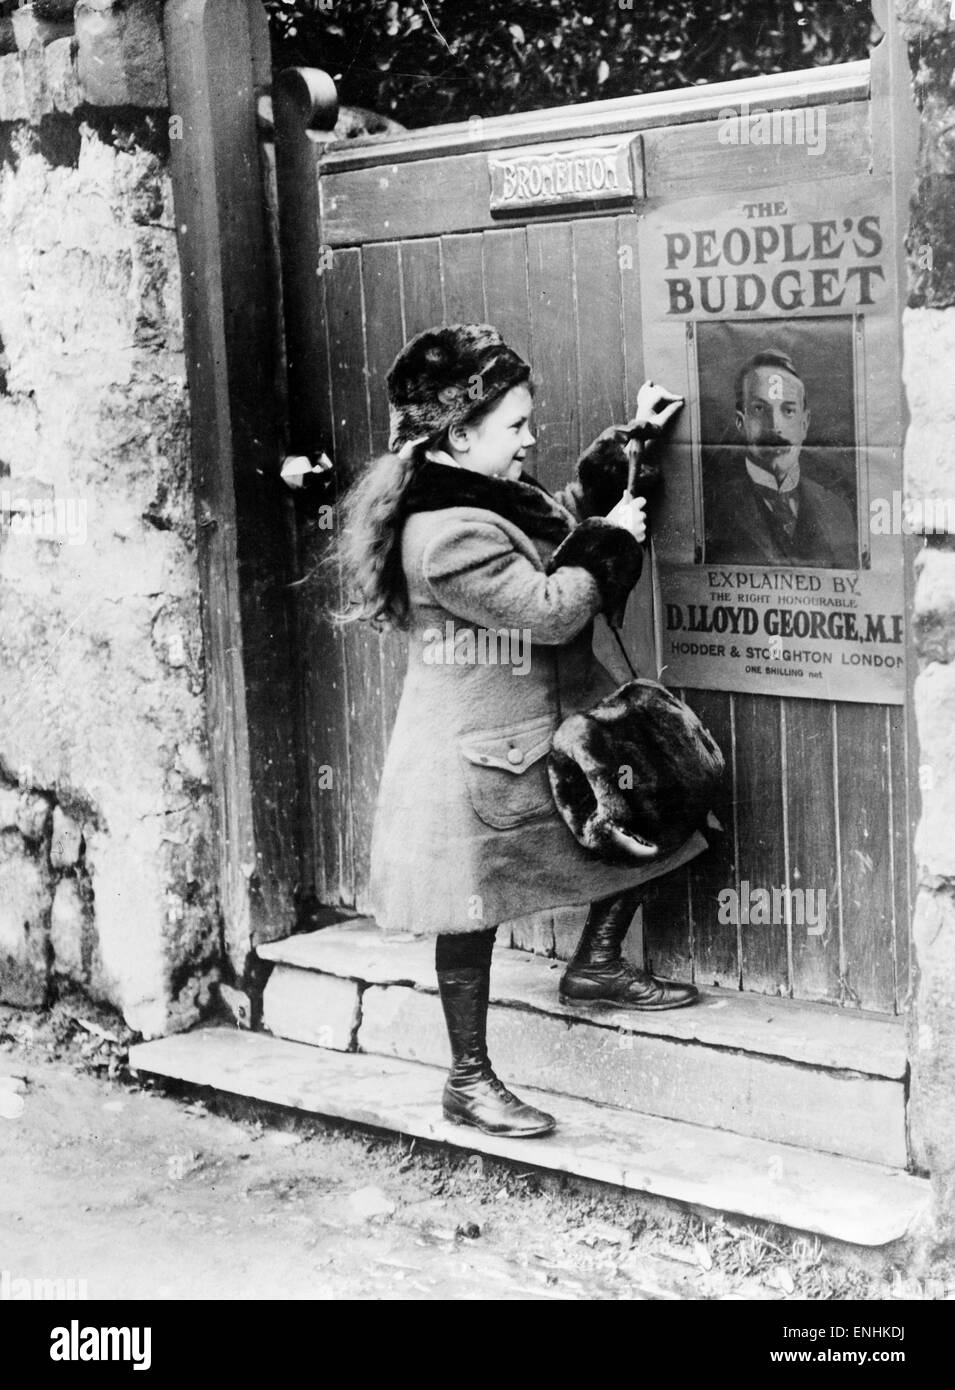 Lady Megan Lloyd George aged 8, fastens a People's Budget poster, featuring a portrait of her father David Lloyd George MP, onto the front of a gate in Wales, 15th January 1910. Stock Photo